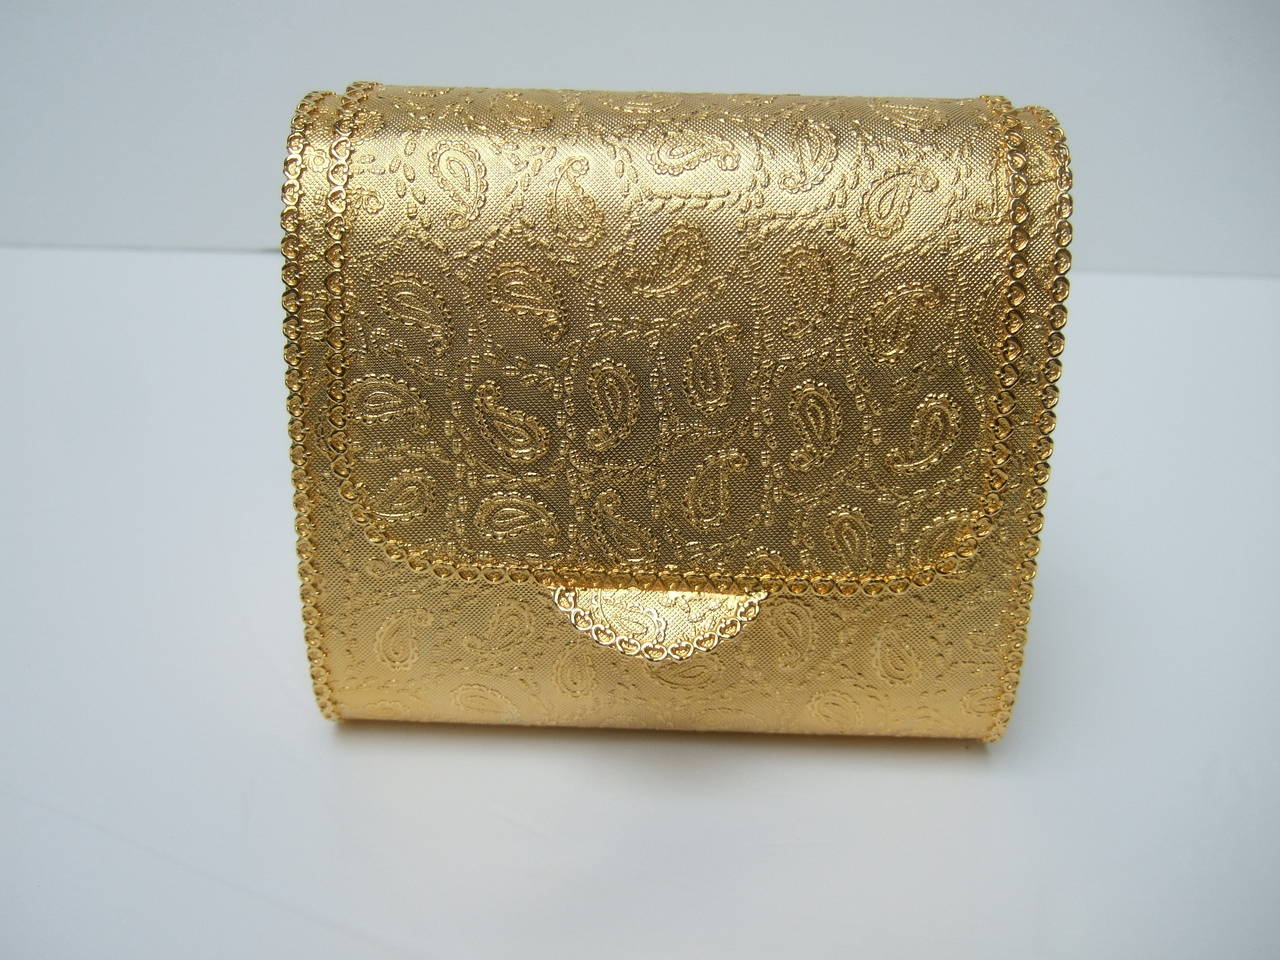 Saks Fifth Avenue Gilt metal evening bag Made in Italy c 1970
The elegant evening bag is covered with paisley designs on the exterior metal
The ornate evening bag is carried with a silver & gilt metal chain strap interspersed with small pastel